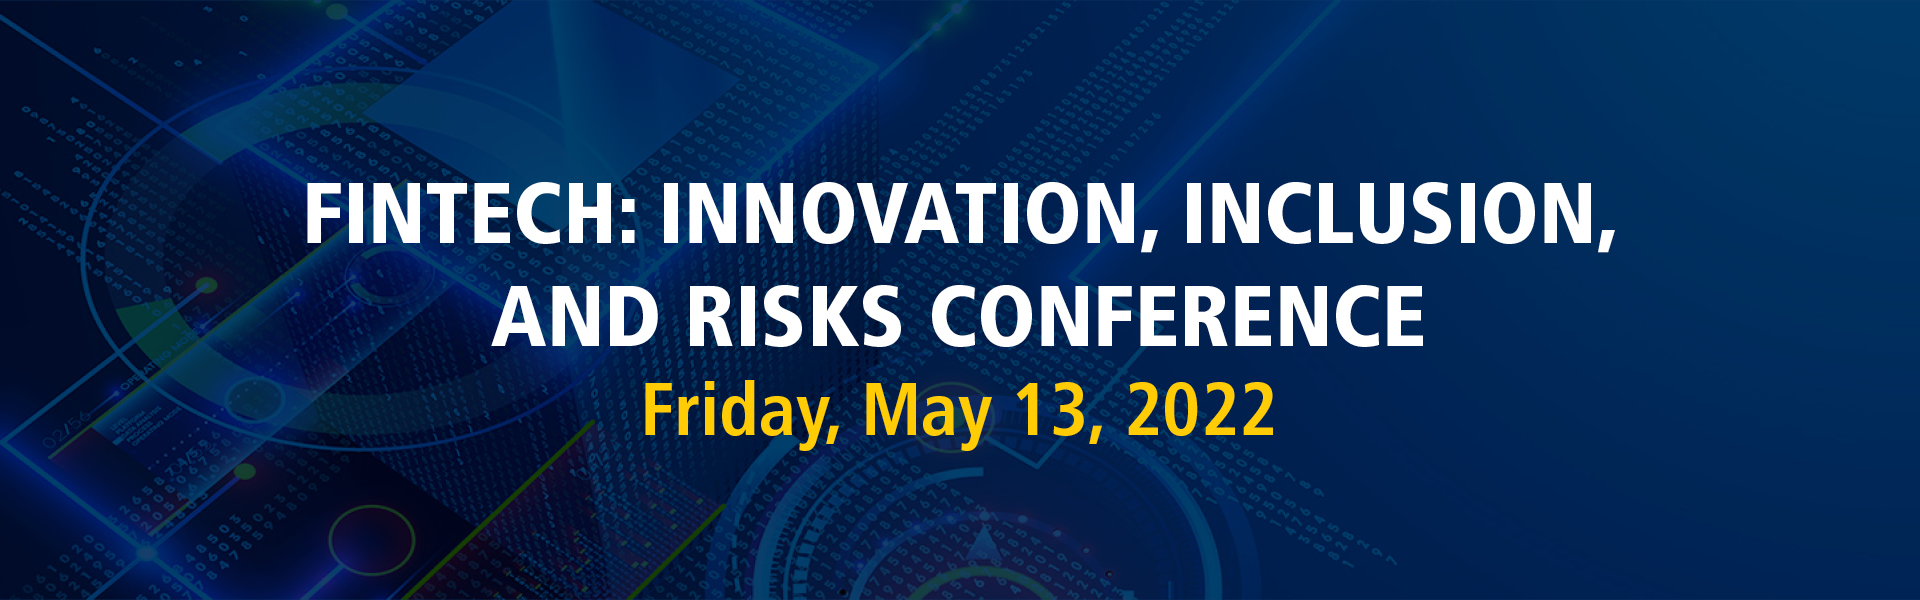 Fintech: Innovation, Inclusion, and Risks Conference 2022